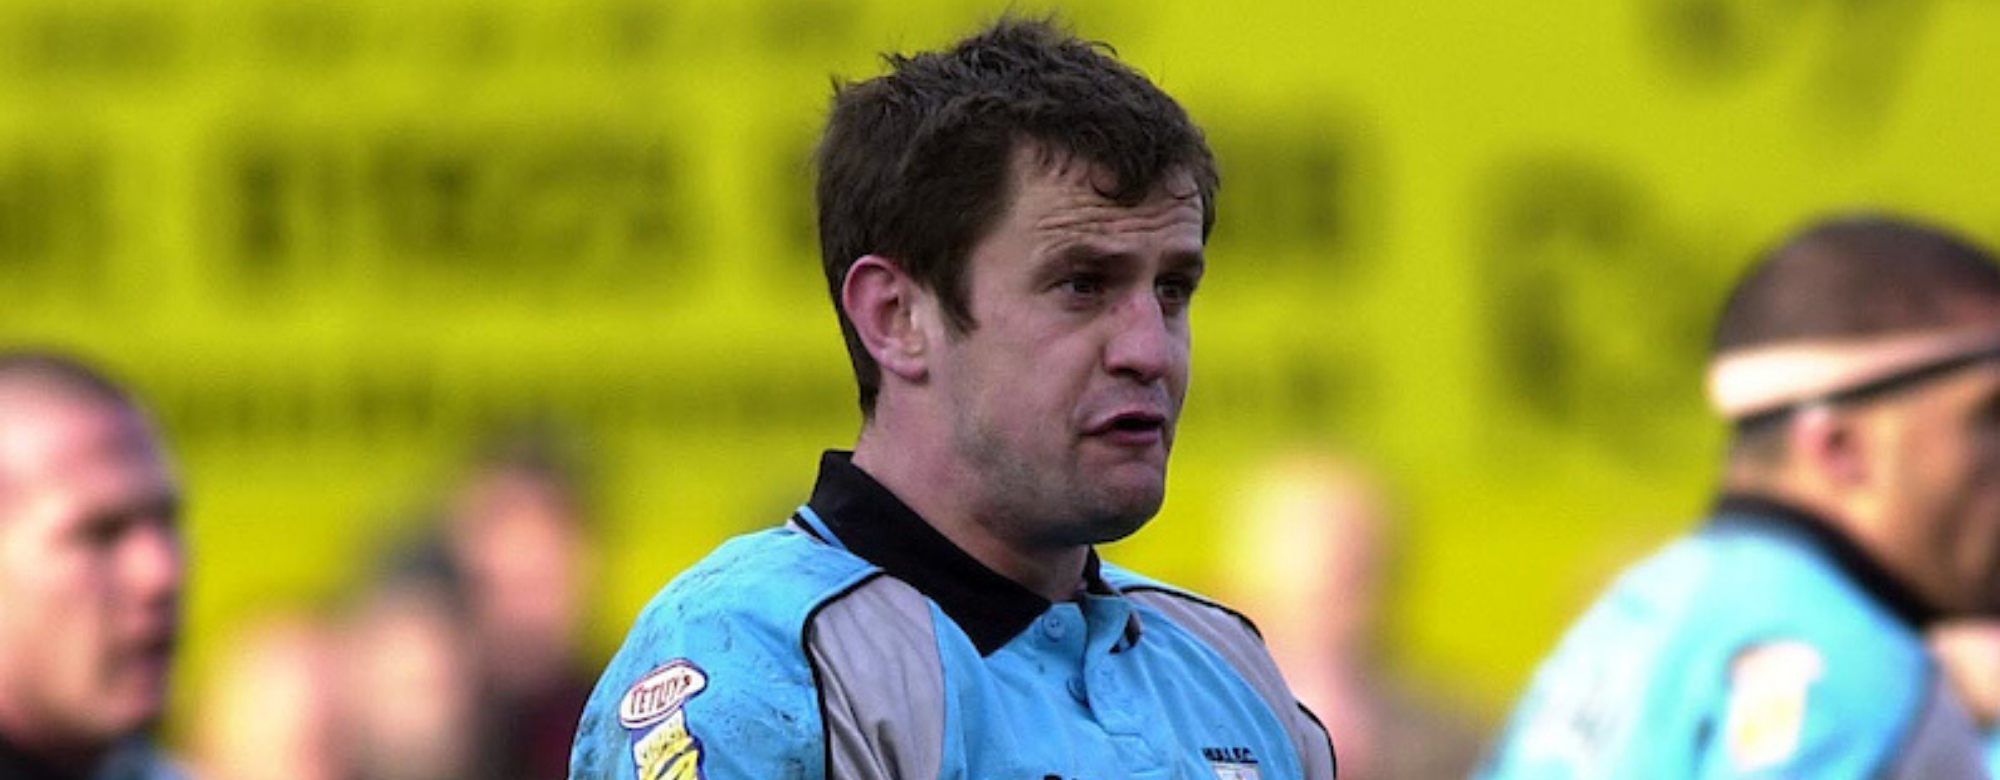 Rugby League Icons: Steve Prescott MBE